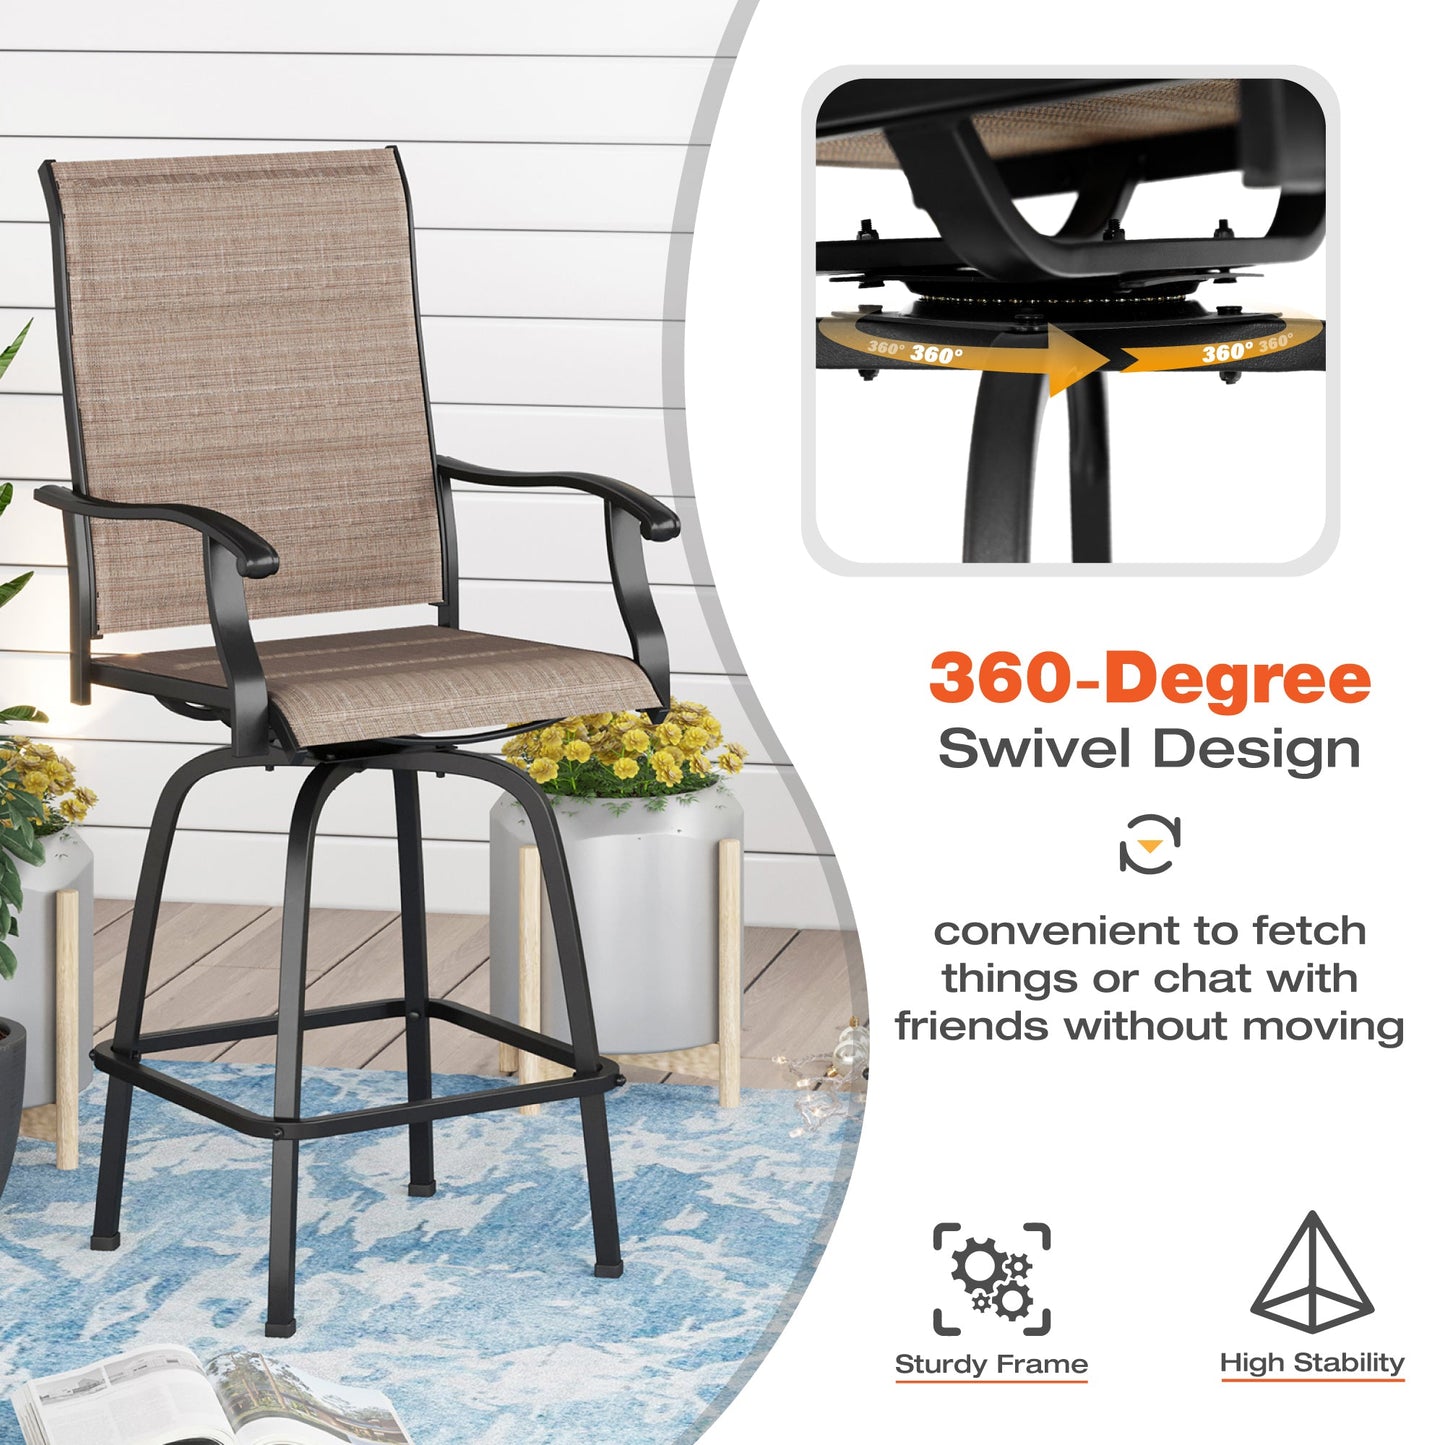 Sophia & William 5 Piece Patio Bar Set Outdoor Furniture Set with Padded Textilene Swivel Stool and Table